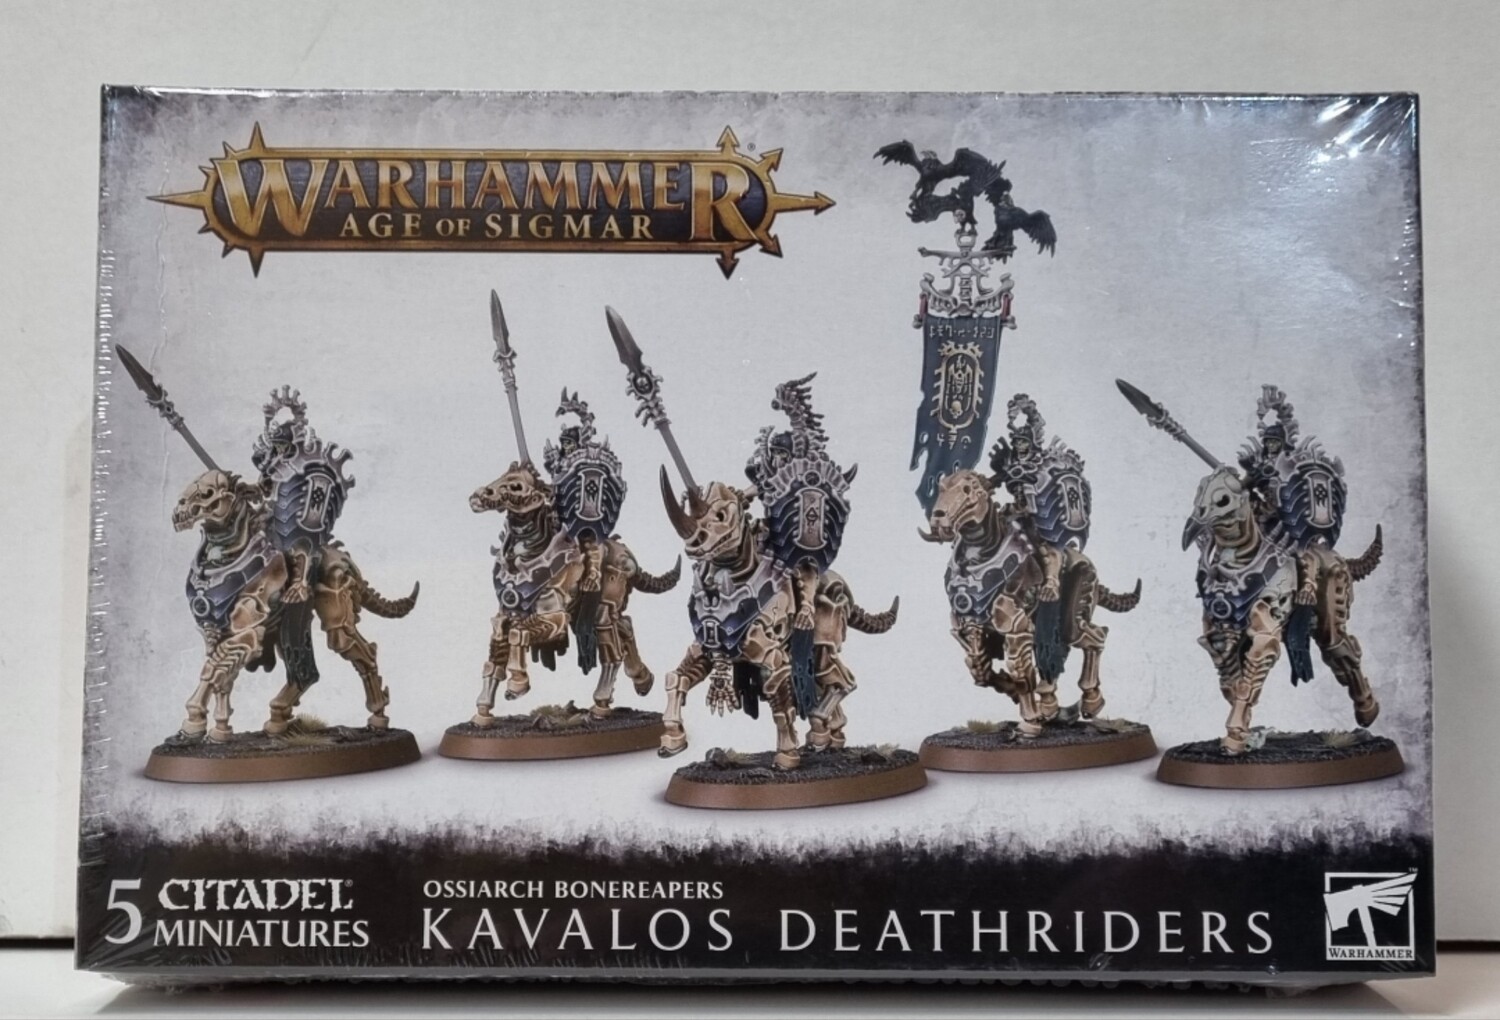 Warhammer, Age of Sigmar, 94-27, Ossiarch Bonereapers: Kavalos Deathriders